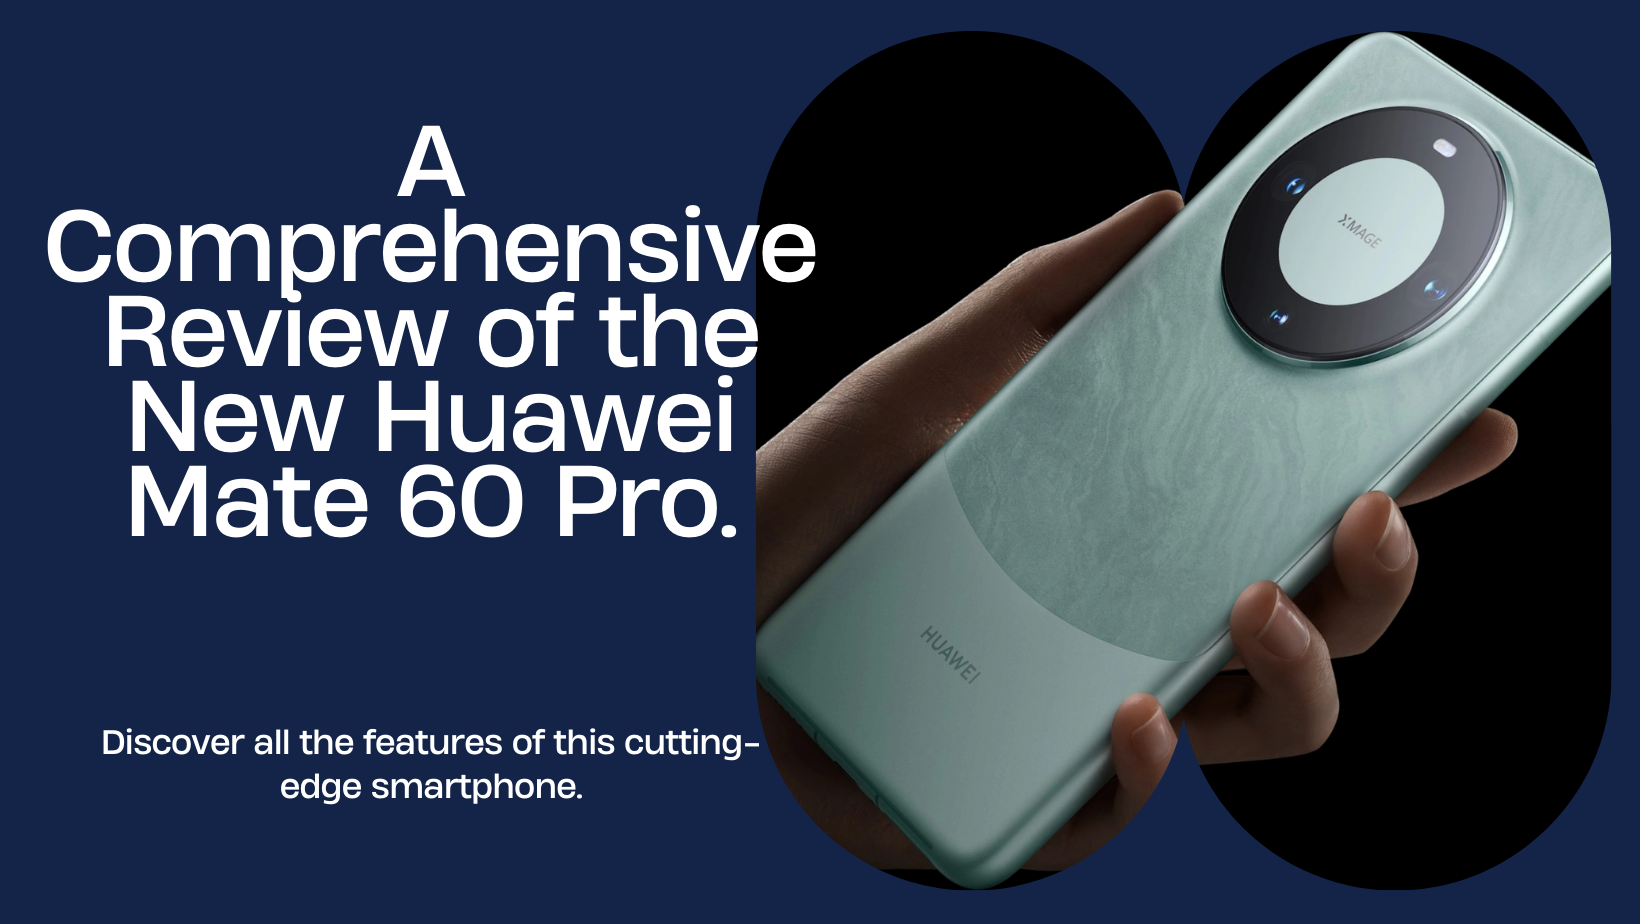 A Comprehensive Review of the New Huawei Mate 60 Pro Smartphone